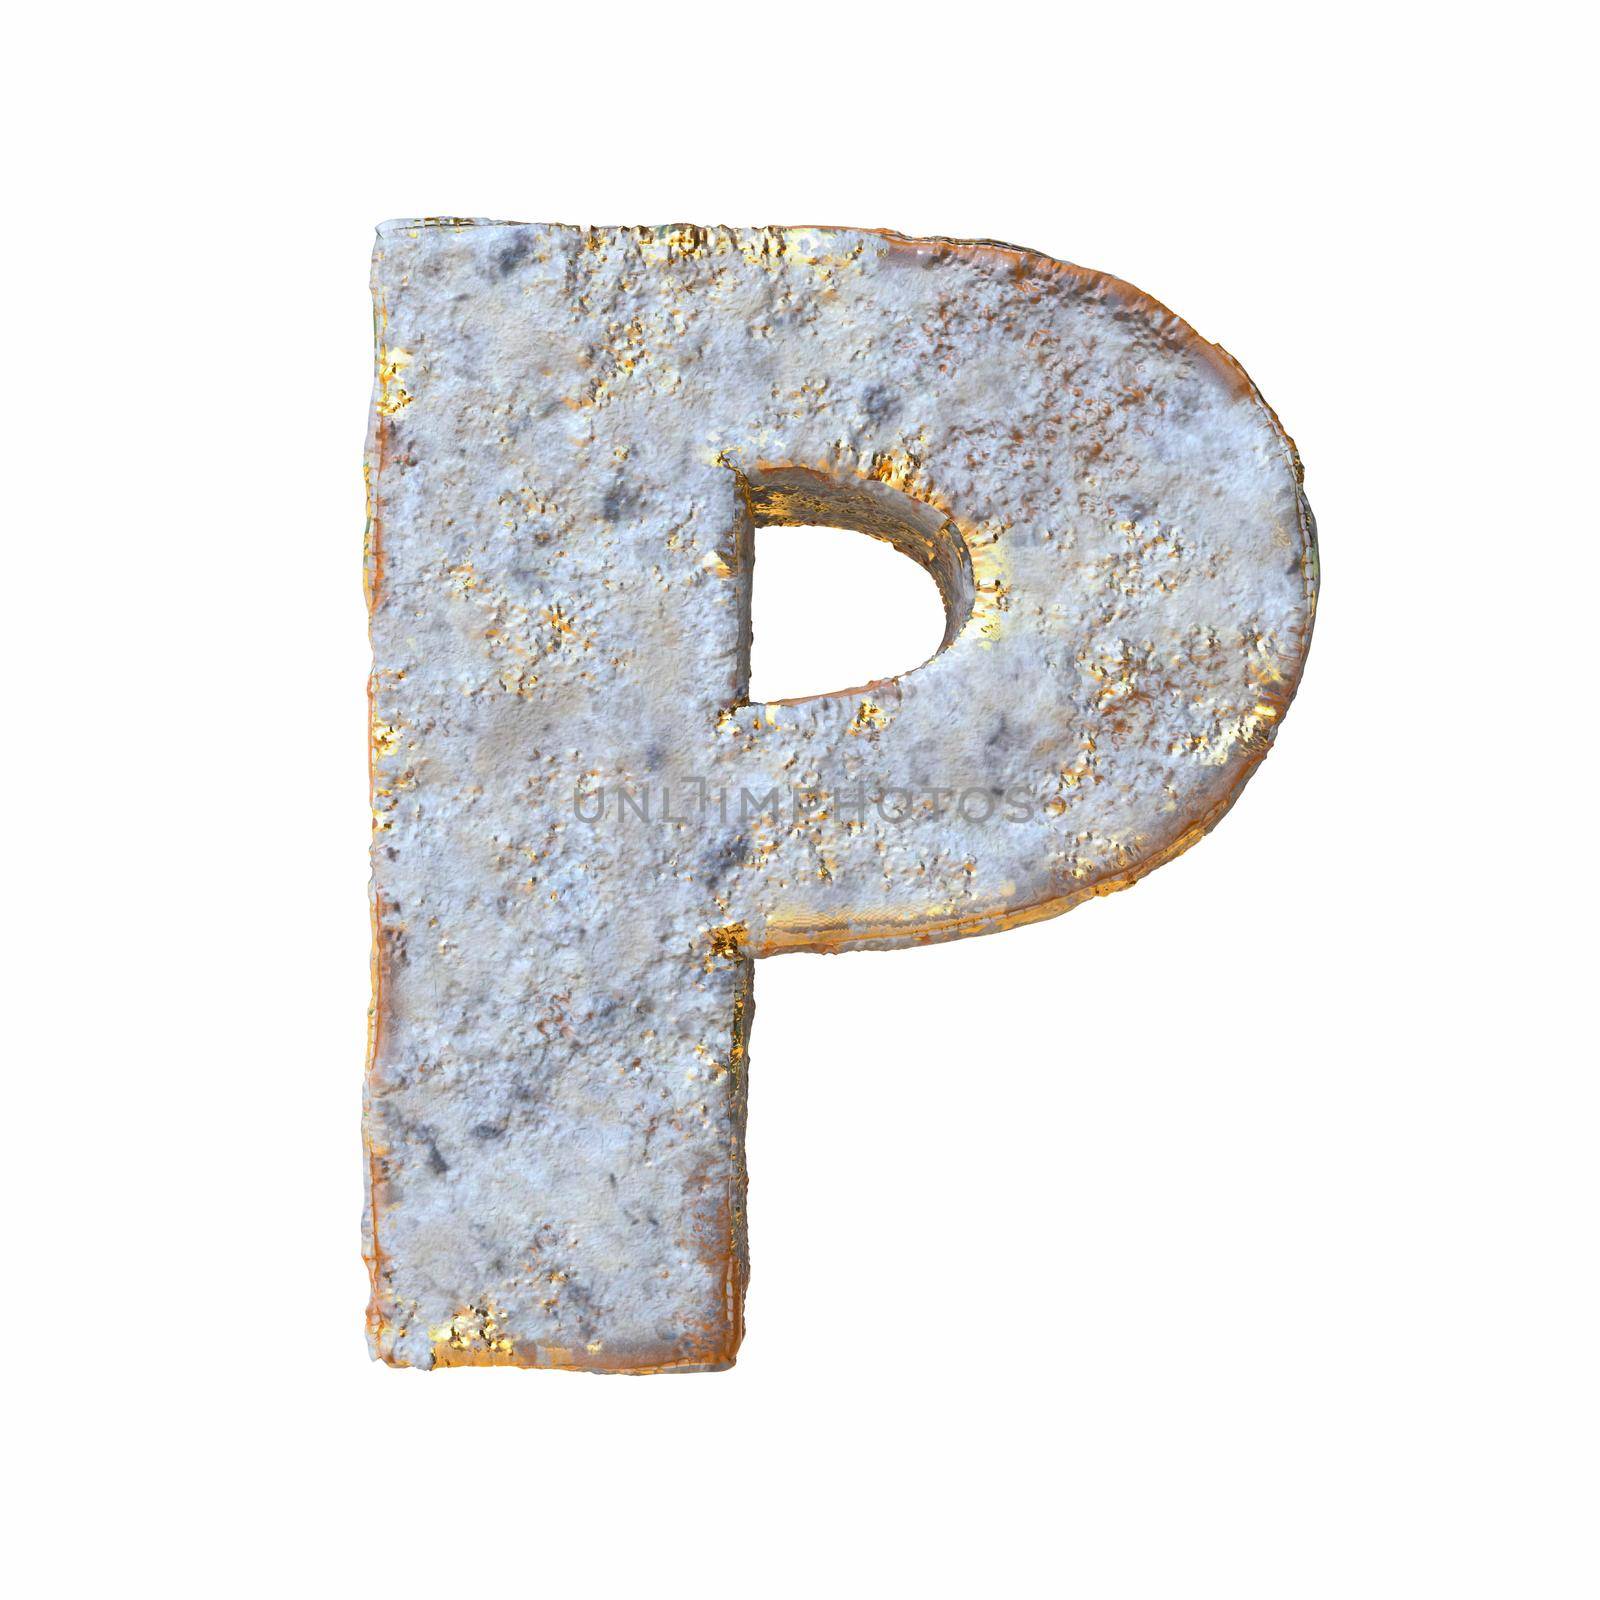 Stone with golden metal particles Letter P 3D rendering illustration isolated on white background